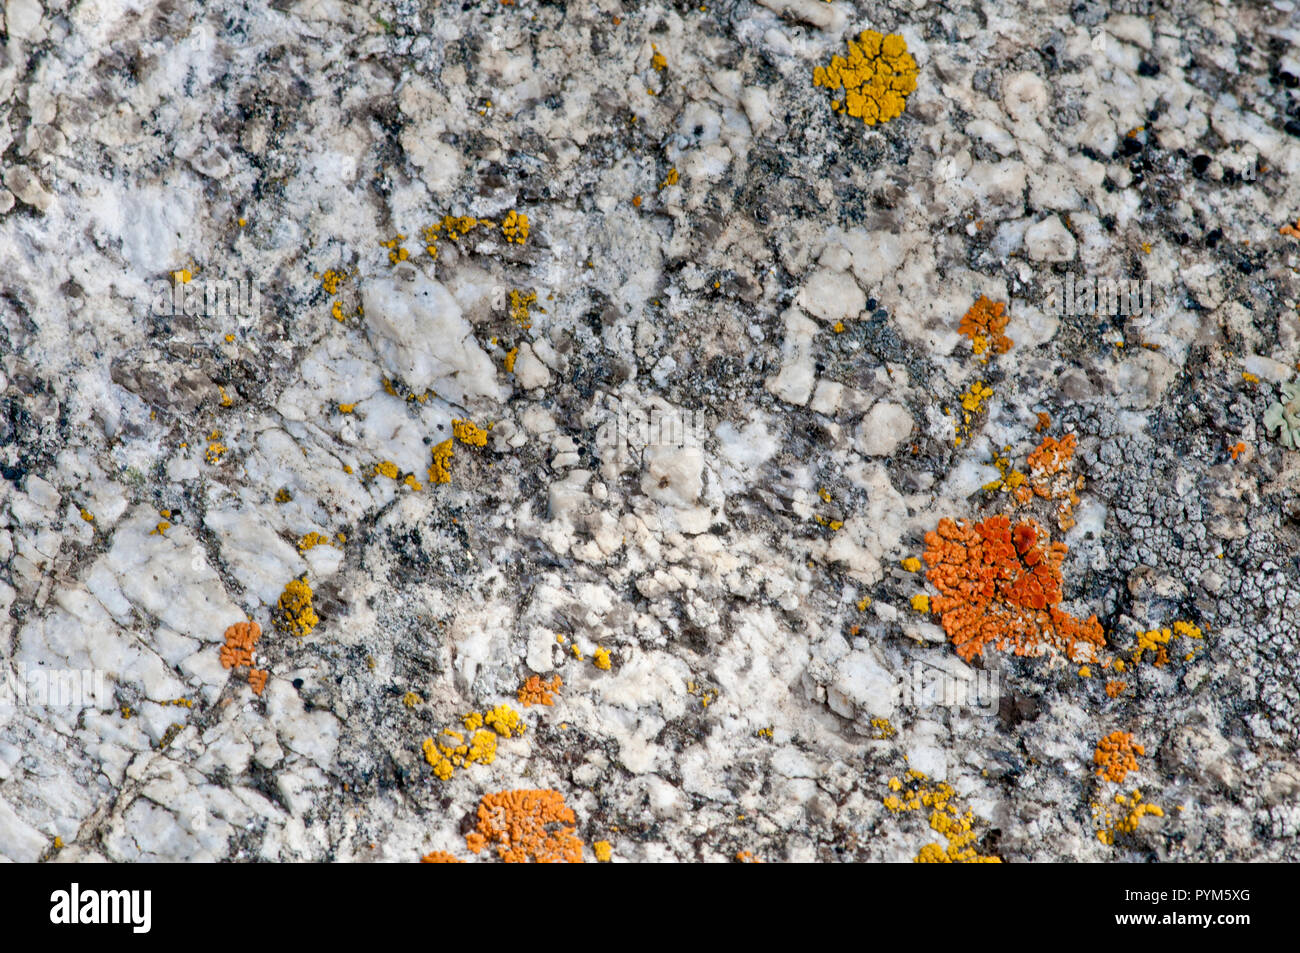 Close-up of Green Creek Complex rock (an assemblage of metamorphic rocks consisting of granite, granitic gneiss [metamorphosed granite] and schist), d Stock Photo